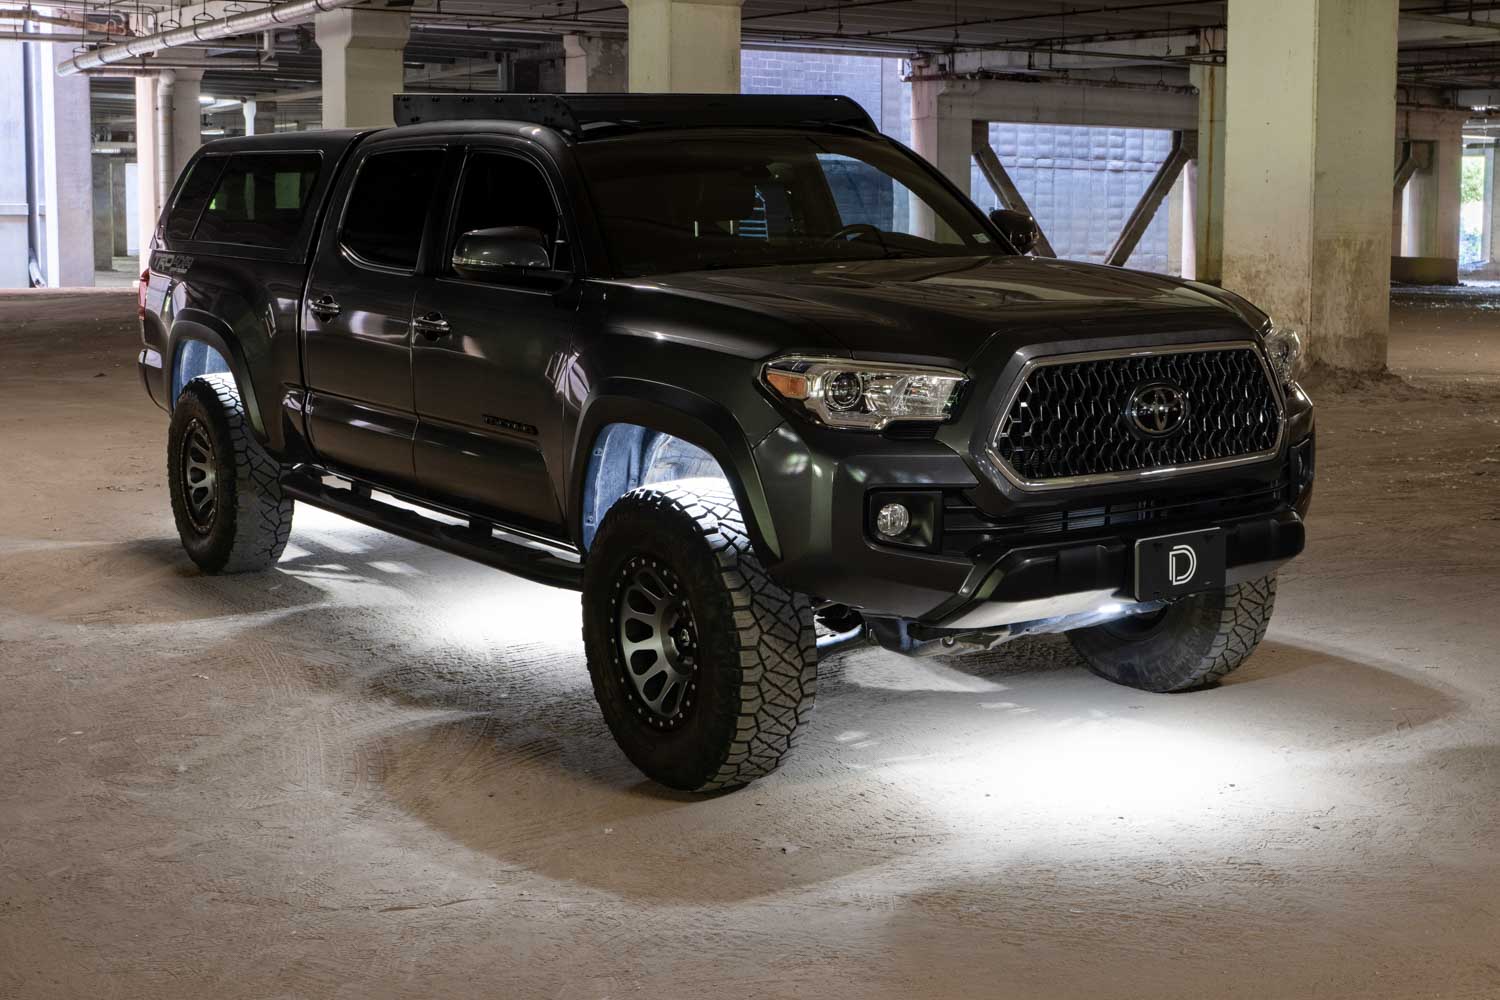 Stage Series Rock Lights for trucks installed on Tacoma